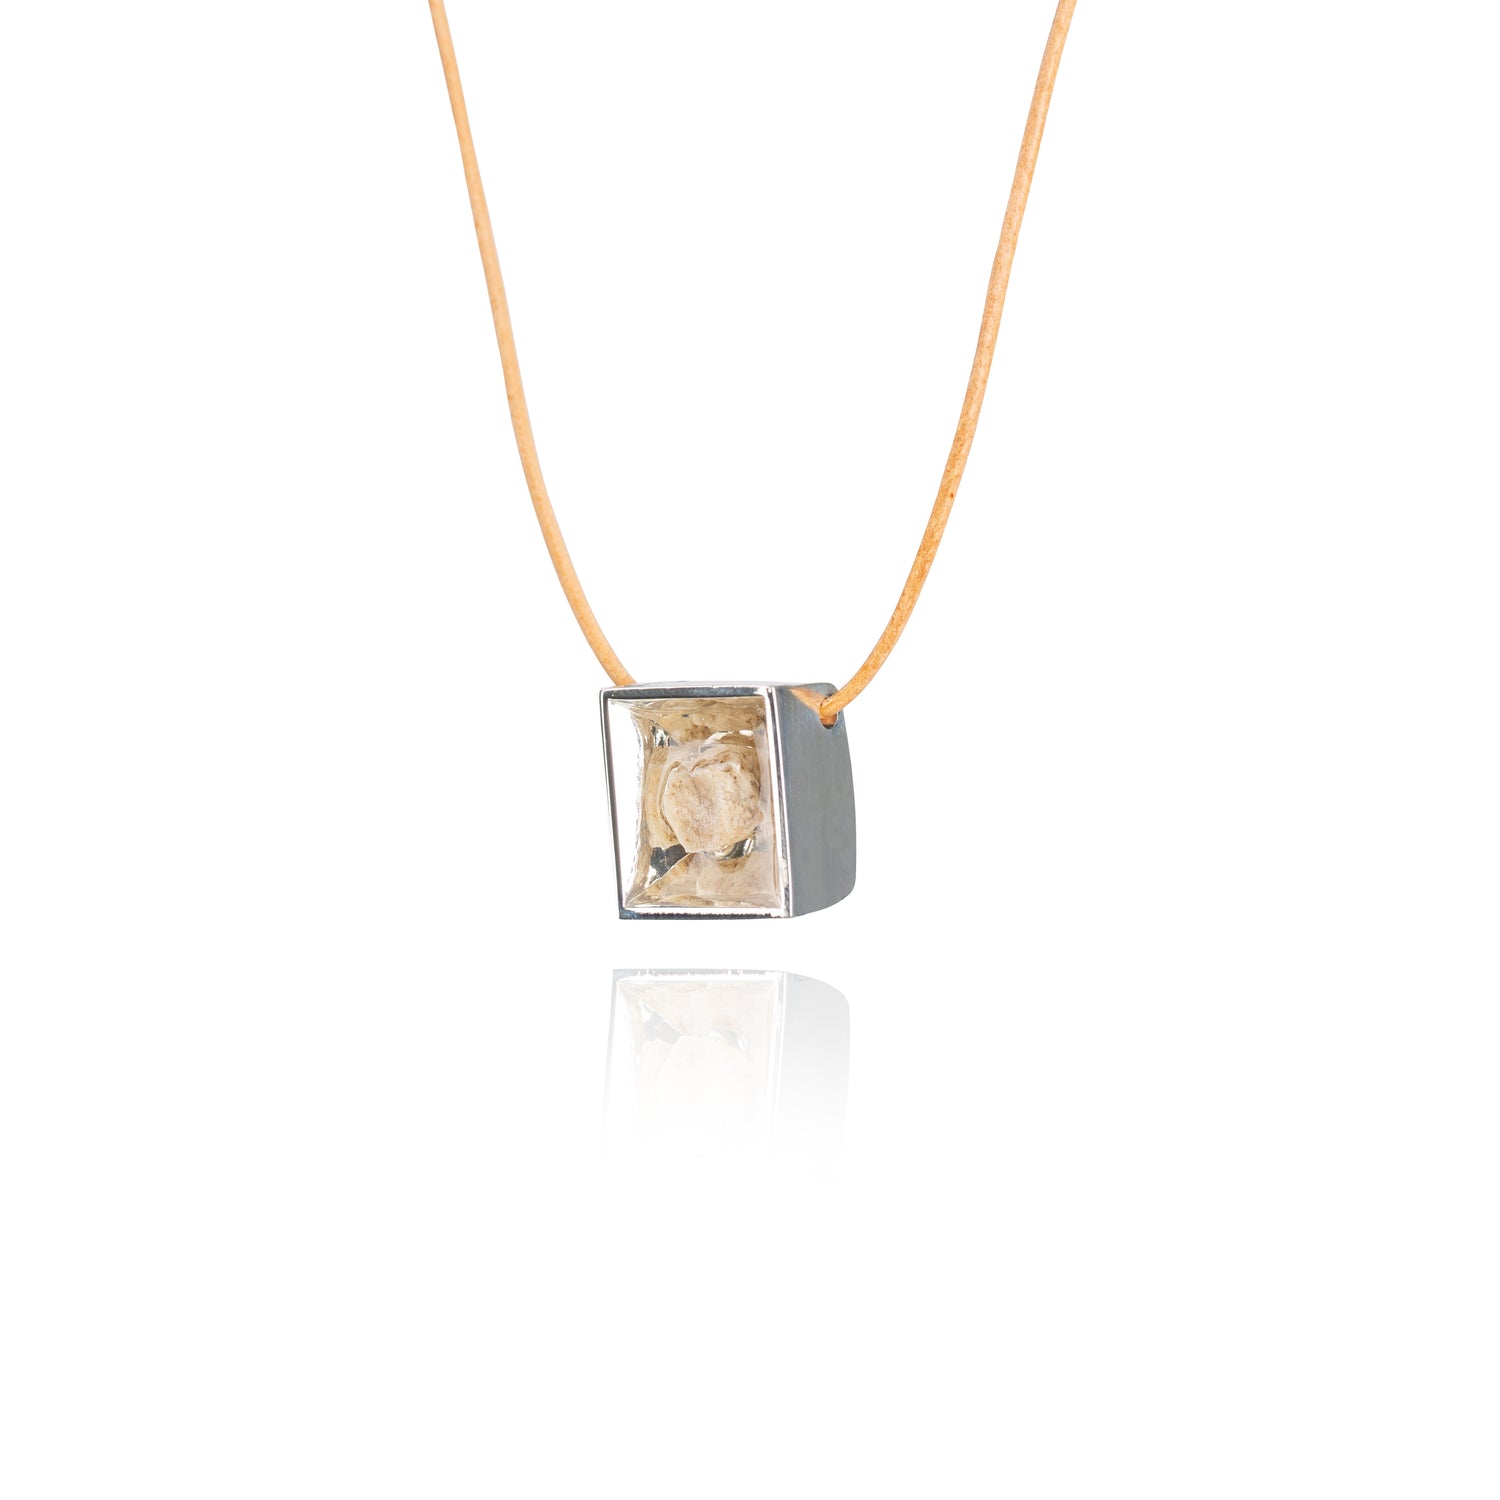 A side view of a small natural tan stone sitting in the middle of a square shaped metal pendant in a silver color. The pendant is hanging on a tan leather necklace.